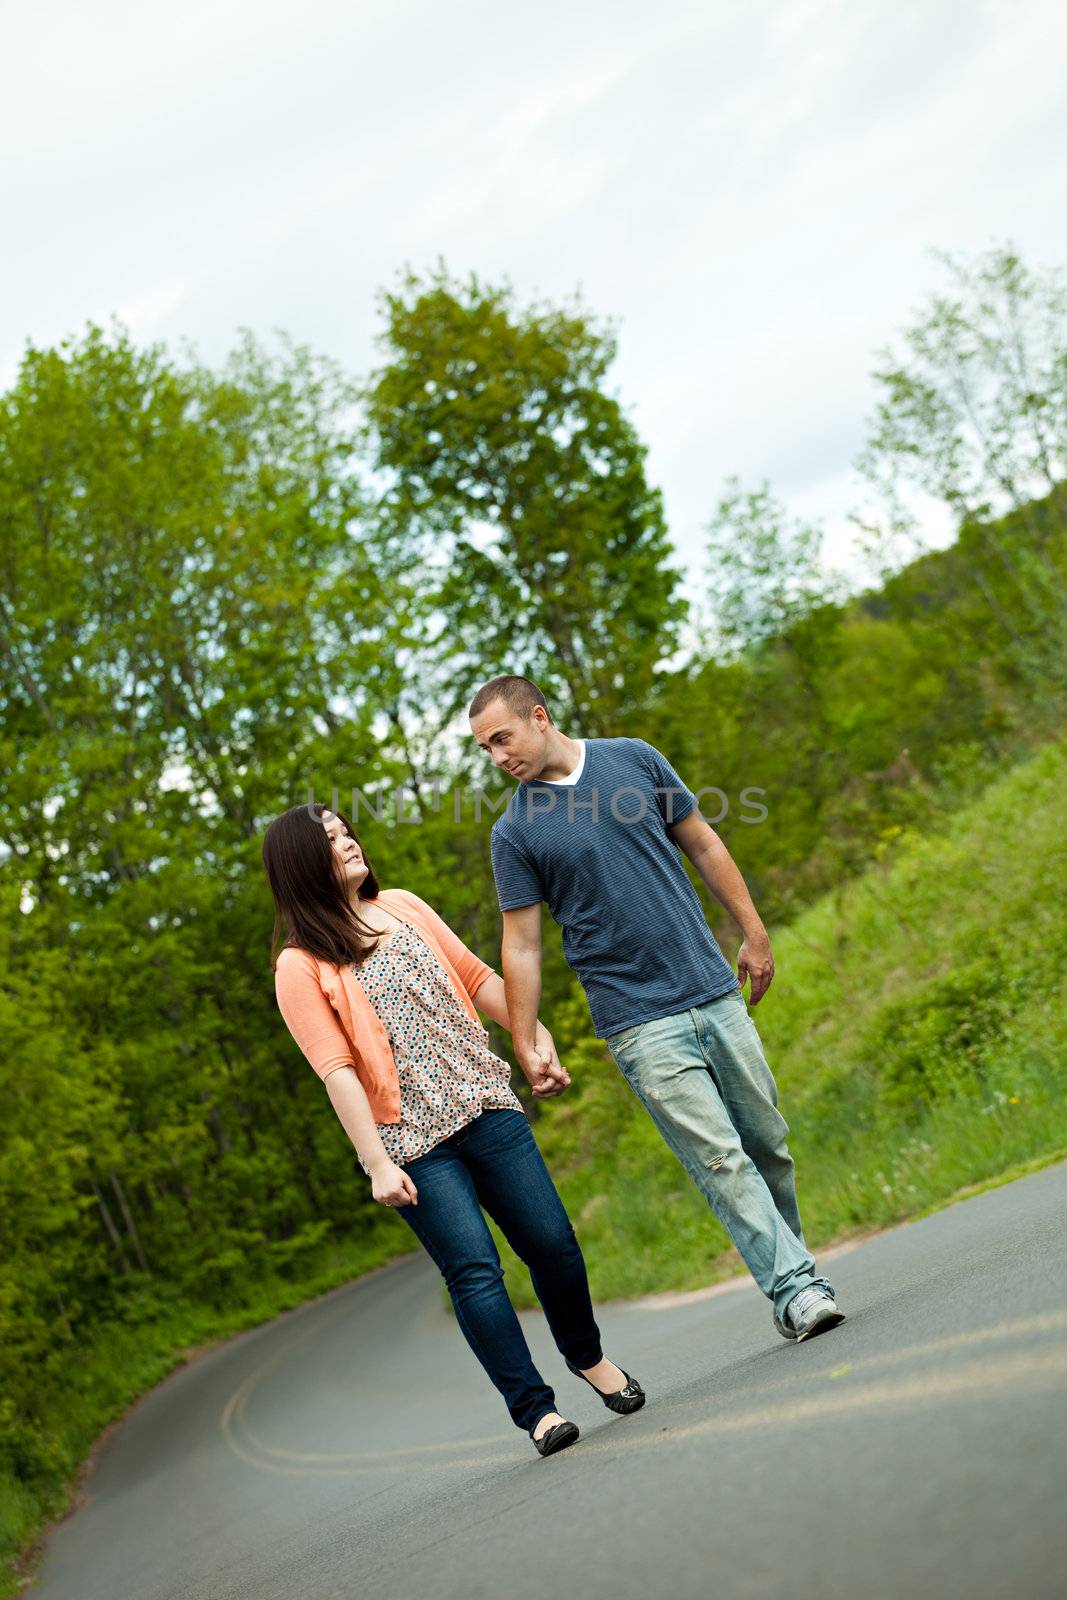 Young happy couple enjoying each others company outdoors walking down an empty road. A very fitting theme for the start of marriage or any romantic relationship.